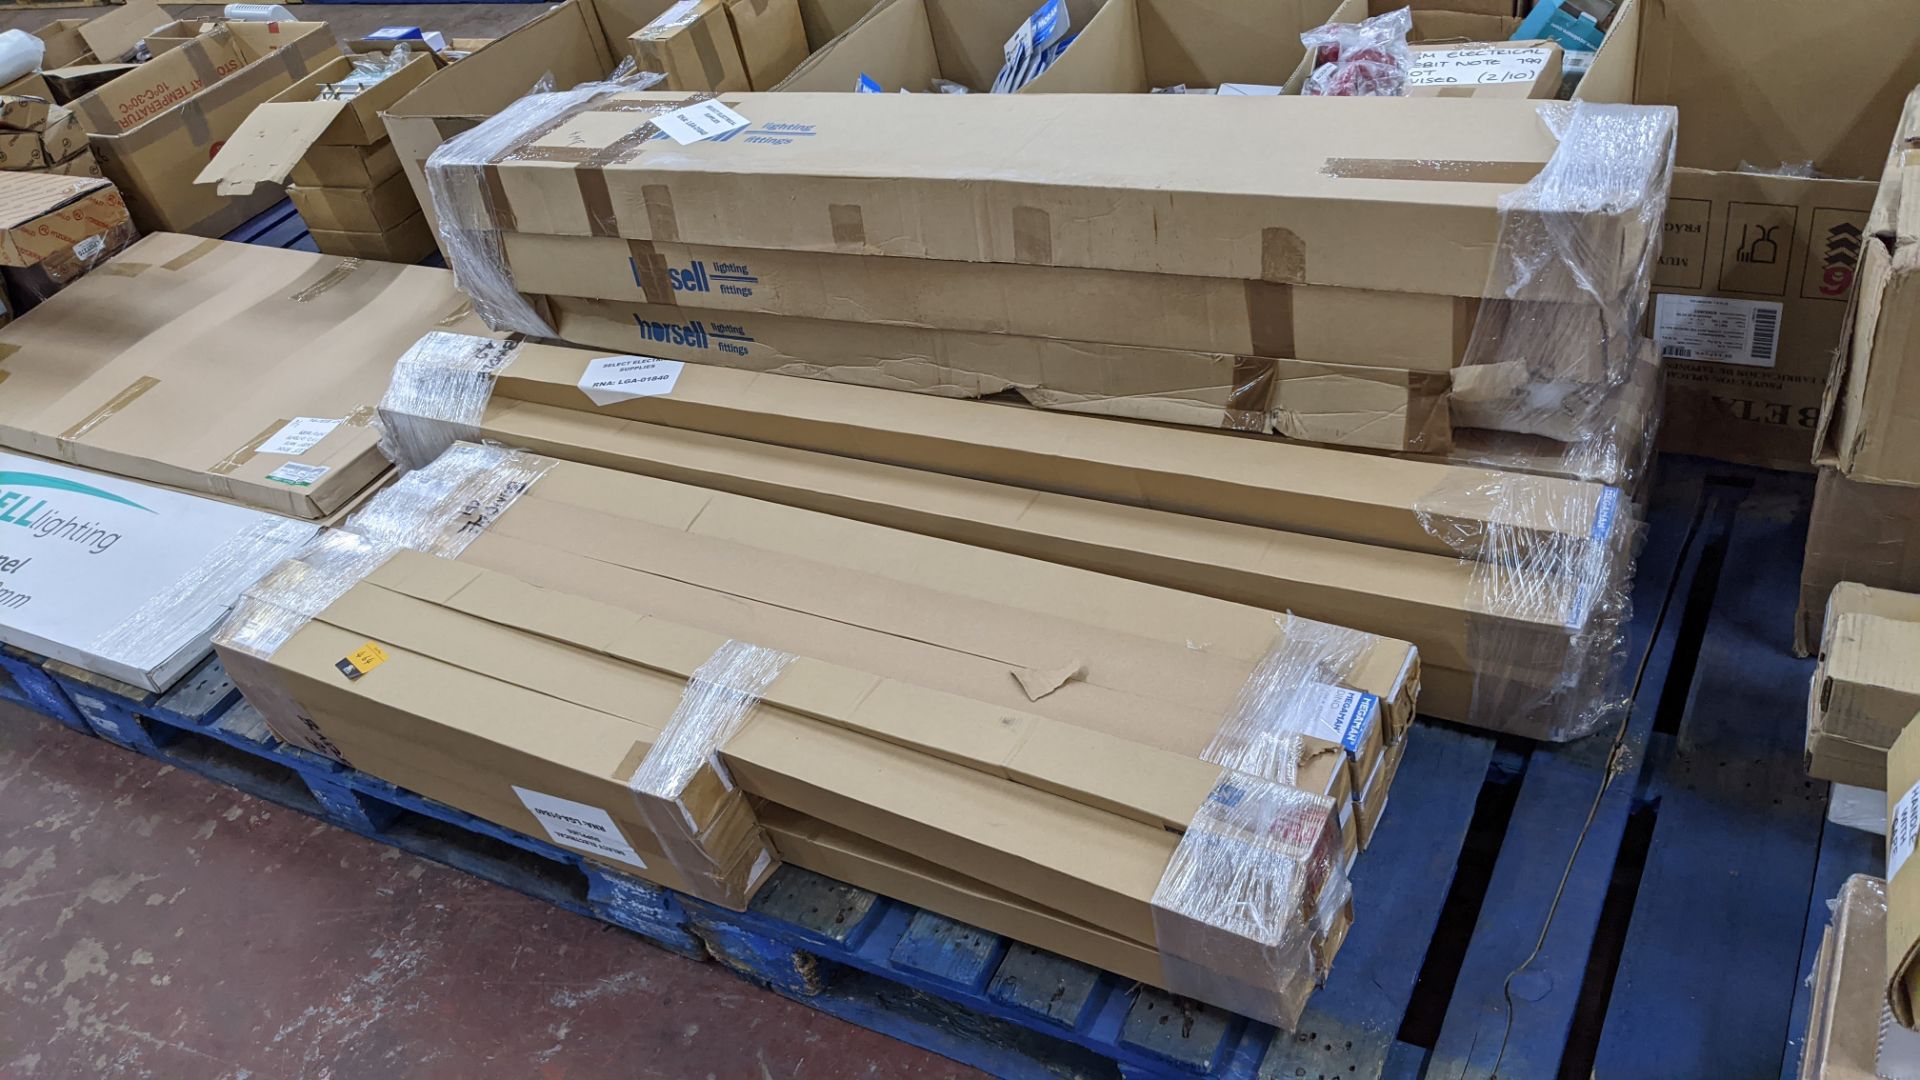 Pallet of assorted integrated waterproof LED battens